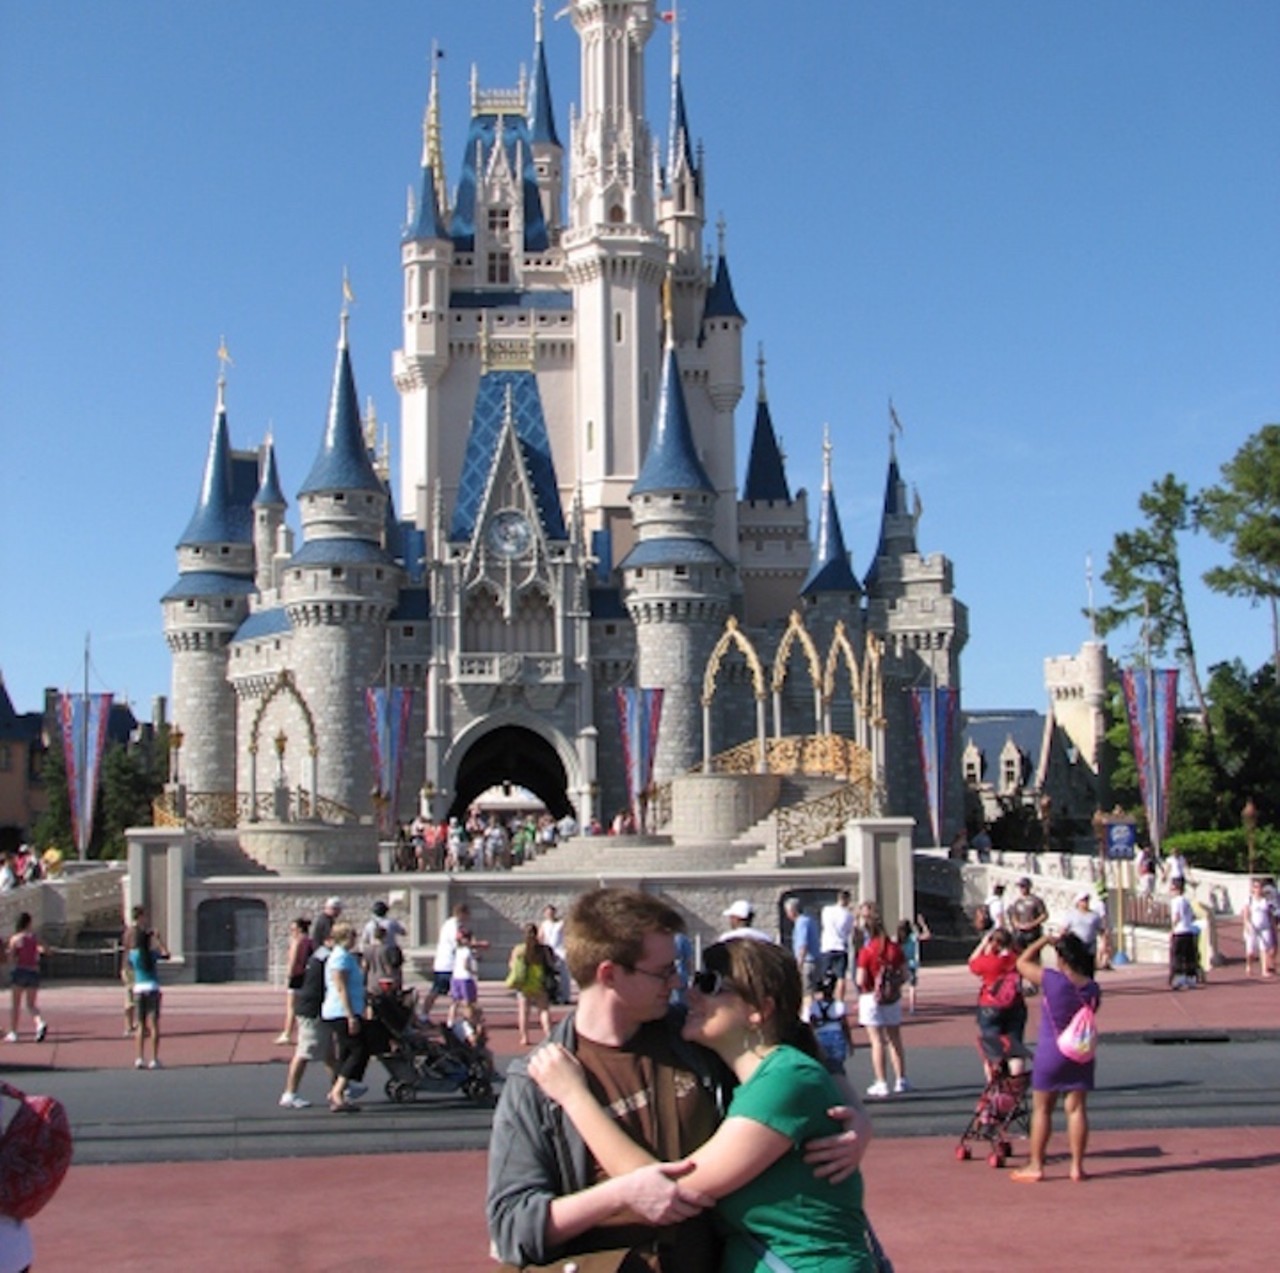 11. Cinderella's Castle
If you're both in love with a mouse, there's no better place to lay on a smooch.
Photo via Dan Catchpole/Flickr